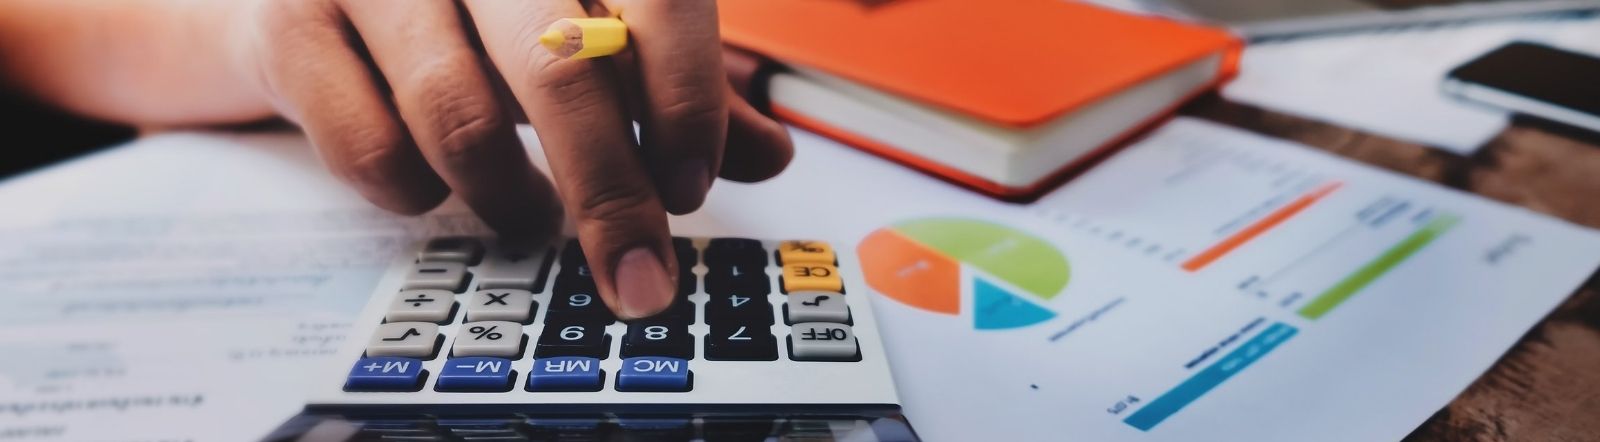 hand using calculator with financial paperwork